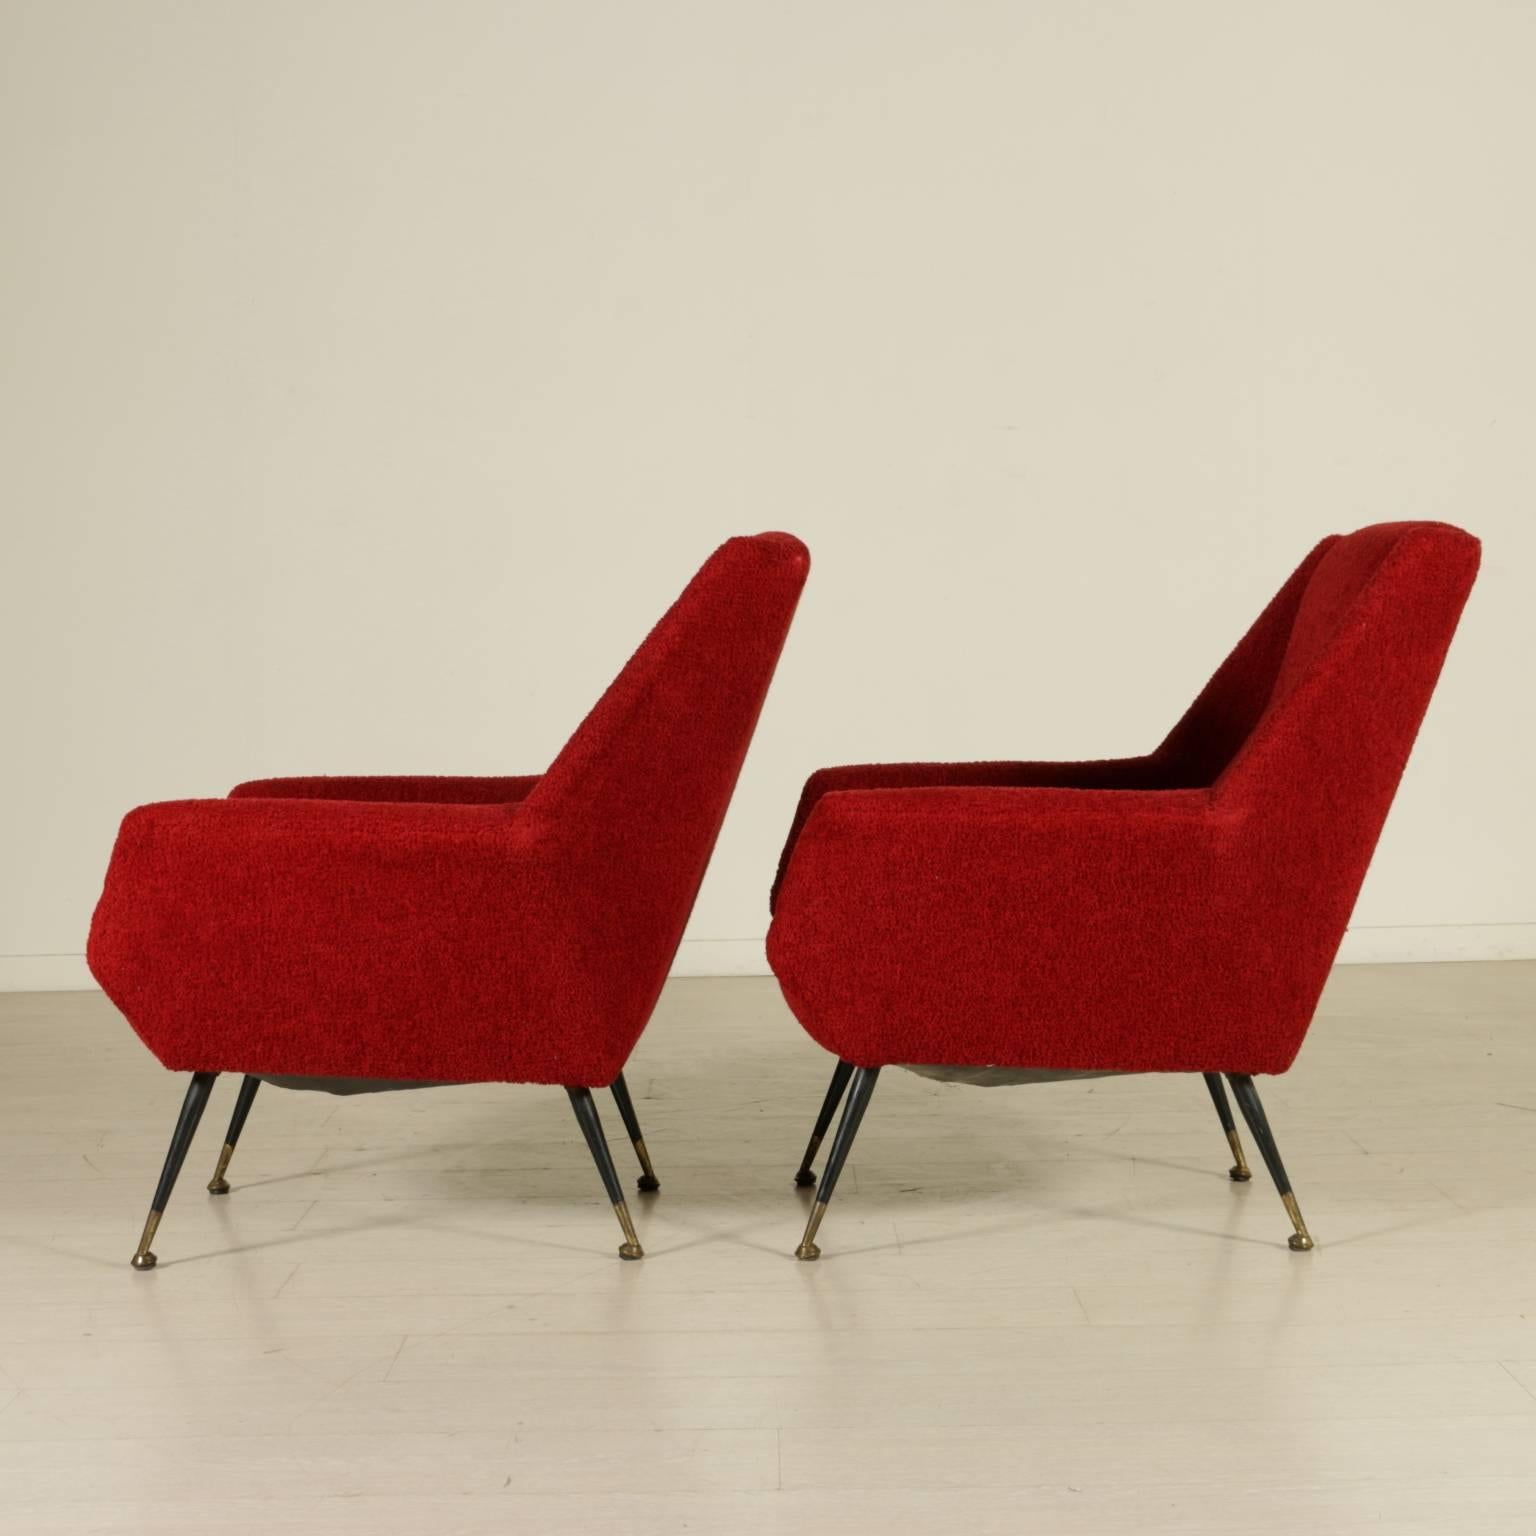 A pair of armchairs, foam padding, original fabric upholstery, metal legs with brass tips. Manufactured in Italy, 1950s-1960s.